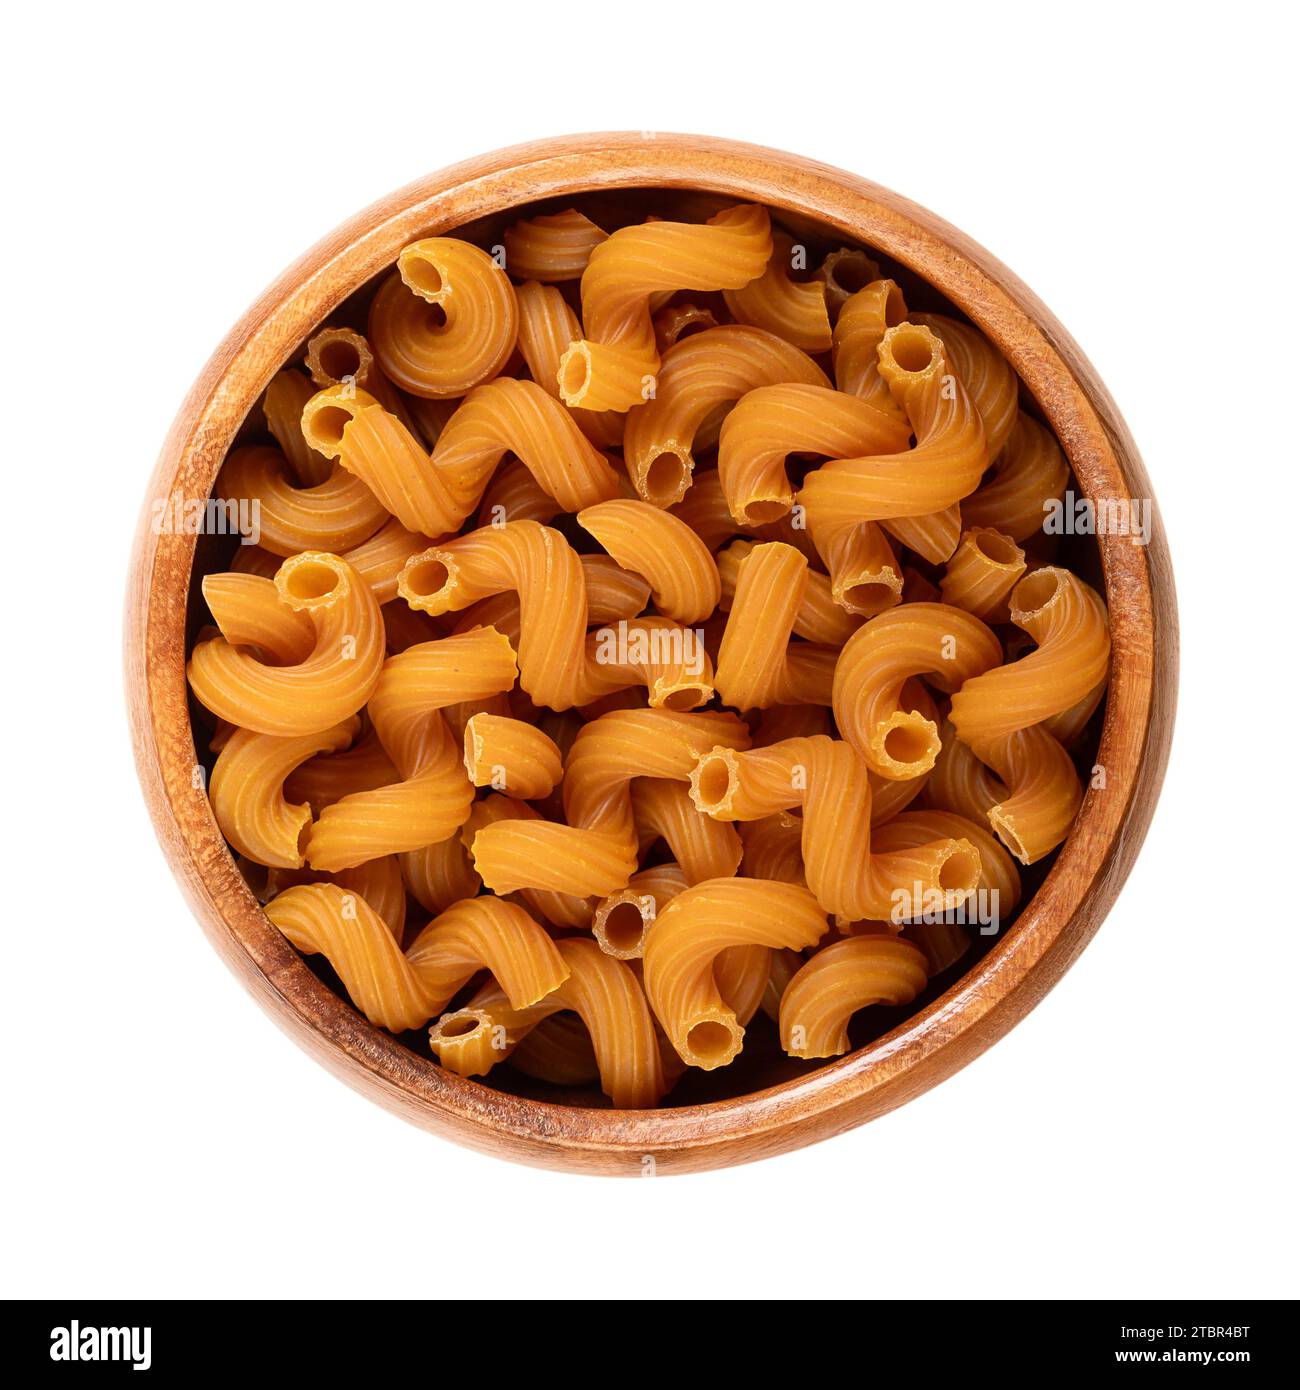 Cellentani or also cavatappi pasta in a wooden bowl. Corkscrew shaped gluten free pasta scored with lines or ridges on the surface. Stock Photo